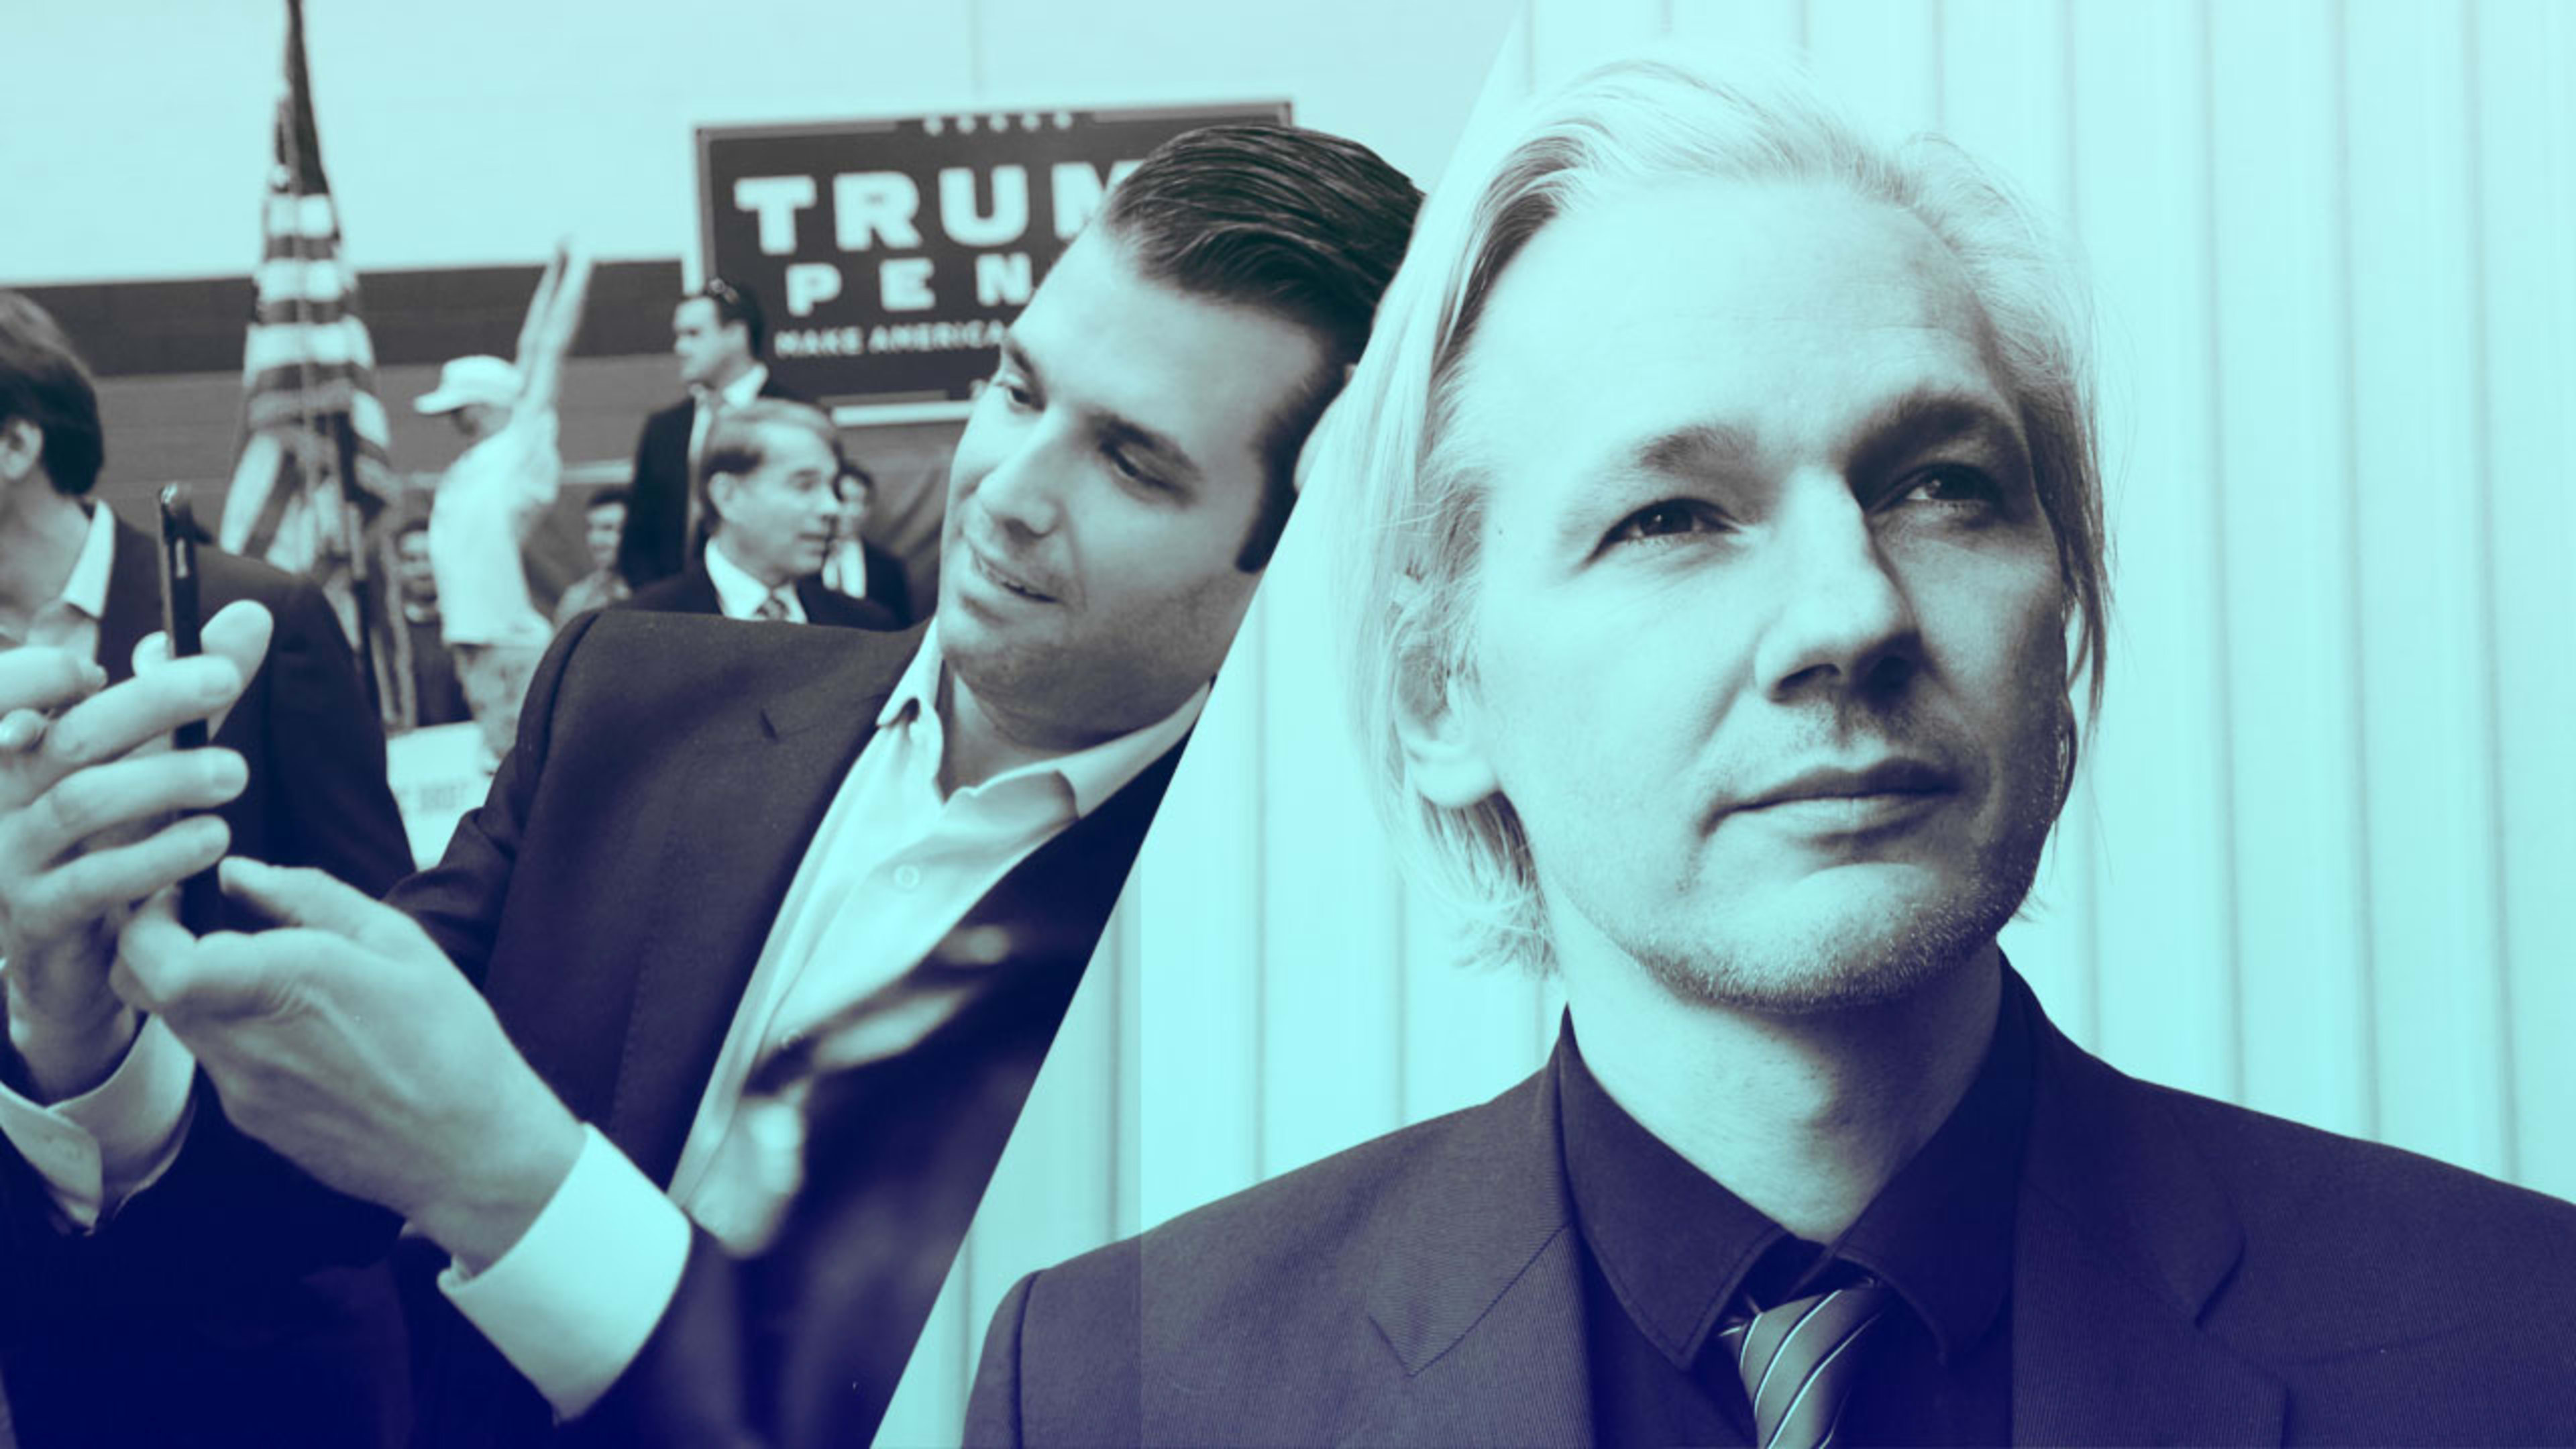 Congrats to Julian Assange for getting that coveted Donald Trump Jr. Twitter follow